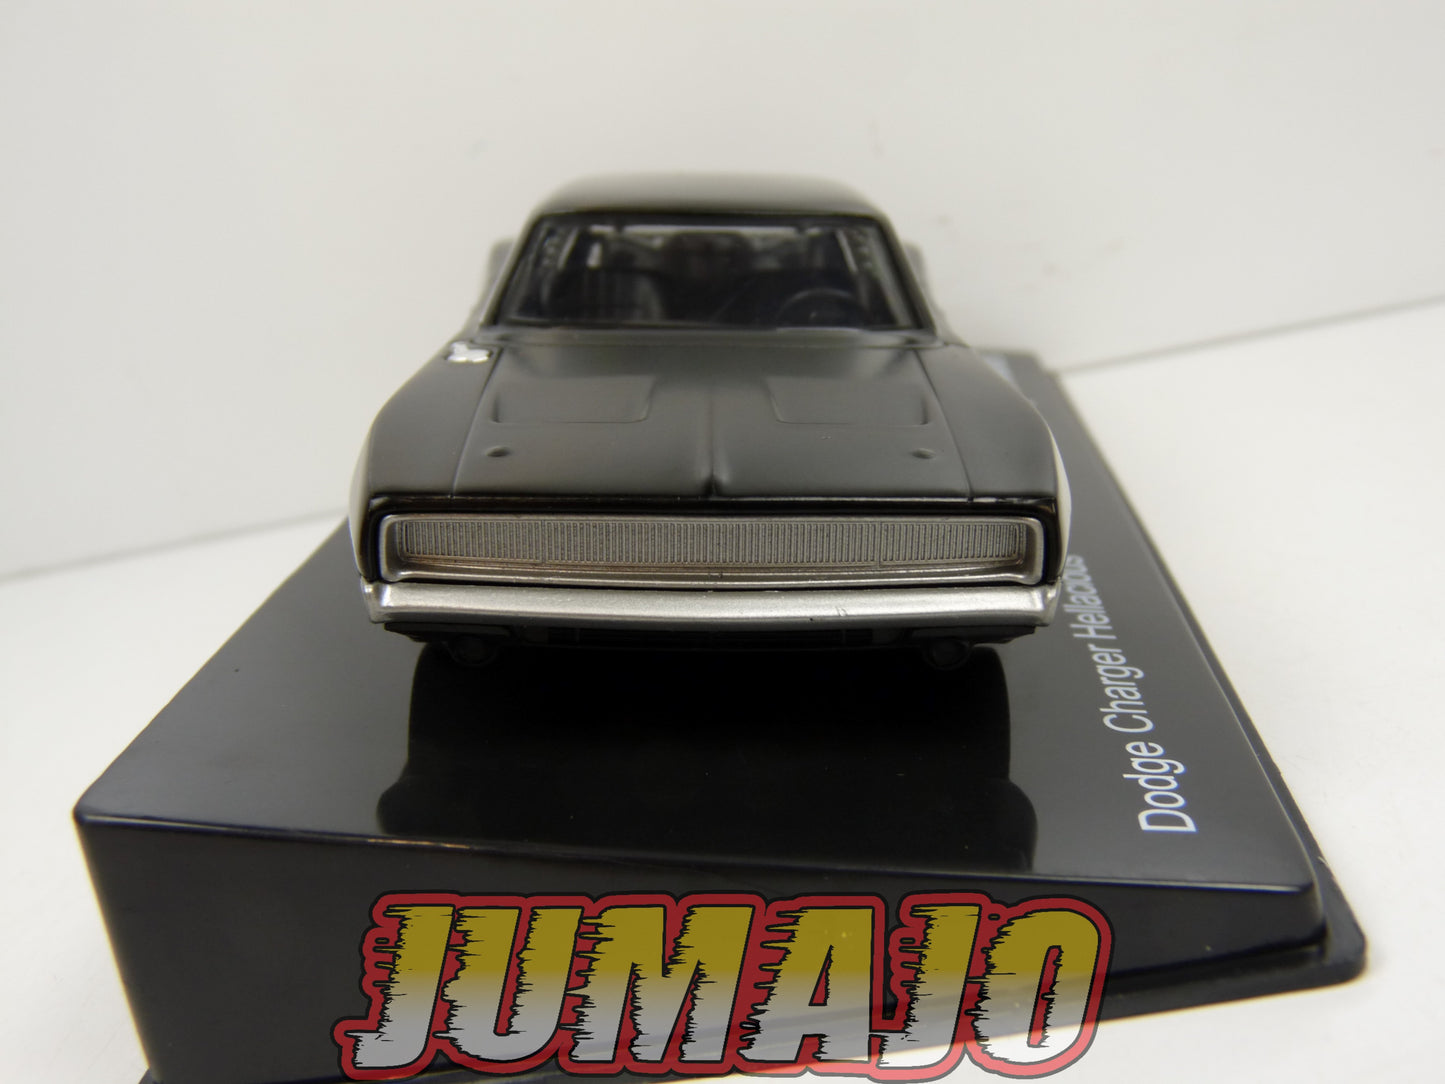 FF38 Voiture 1/43 IXO altaya Fast and Furious : Dodge Charger Hellacious